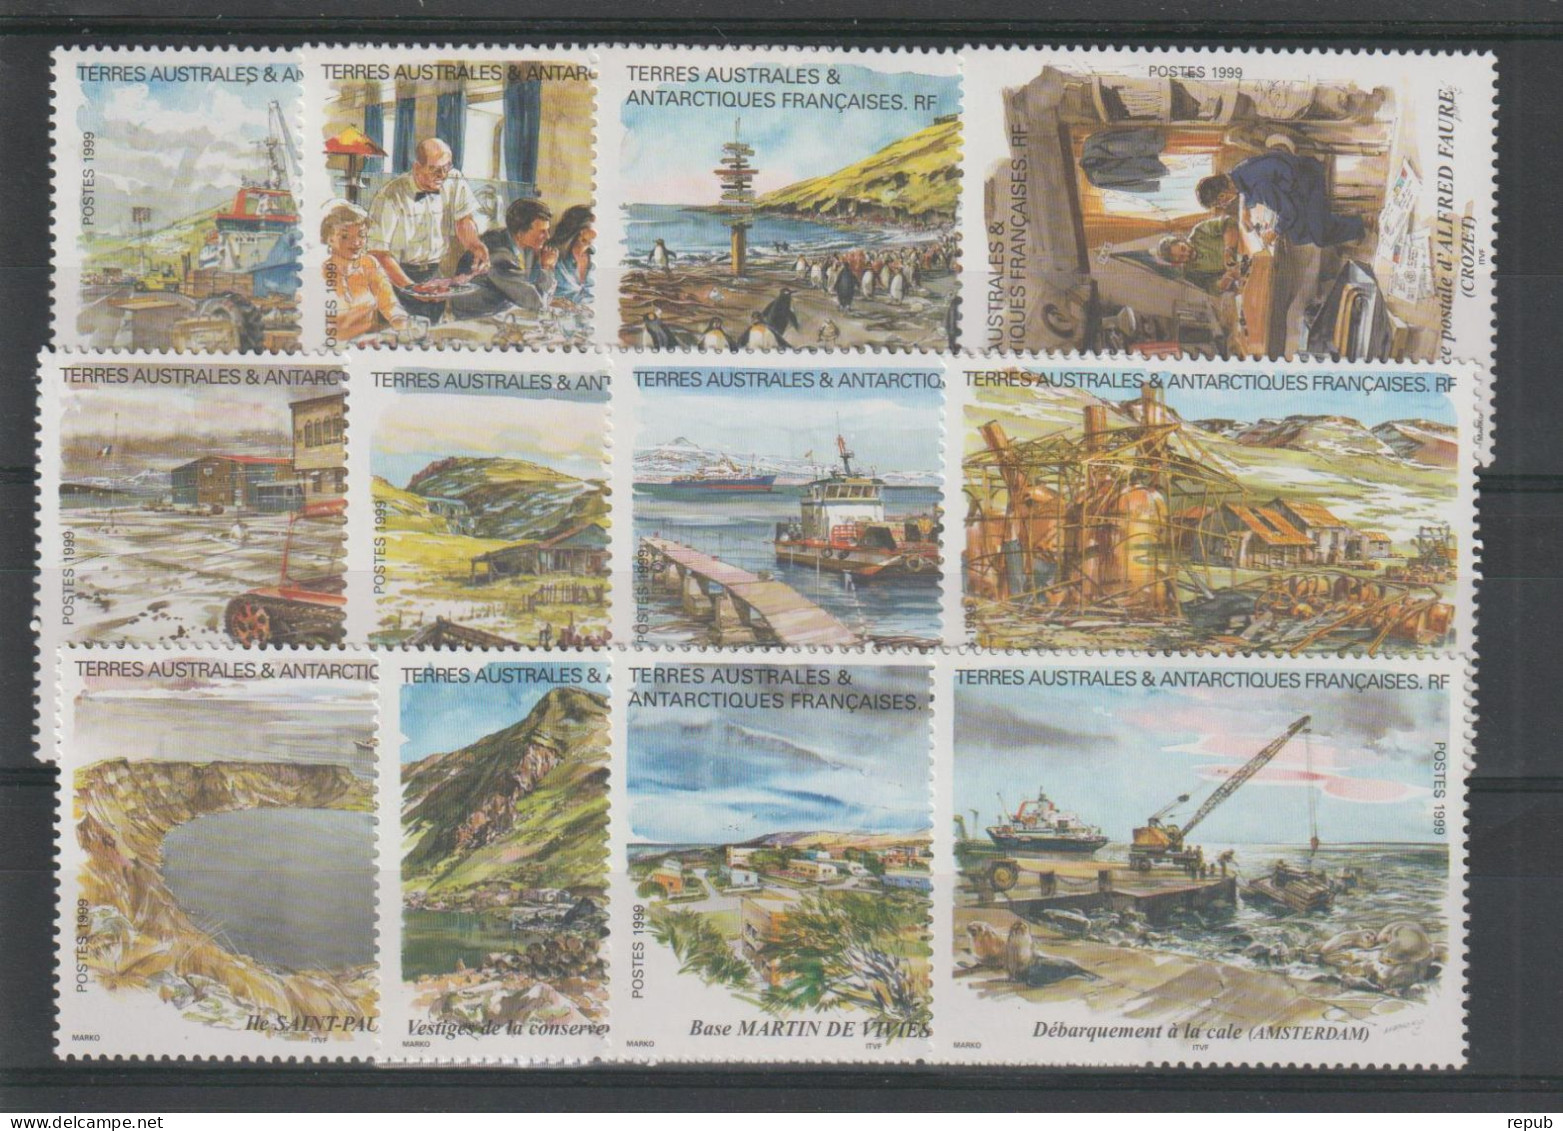 TAAF 1999 Timbres Issus Du Carnet De Voyage 248-259, 12 Val ** MNH - Neufs